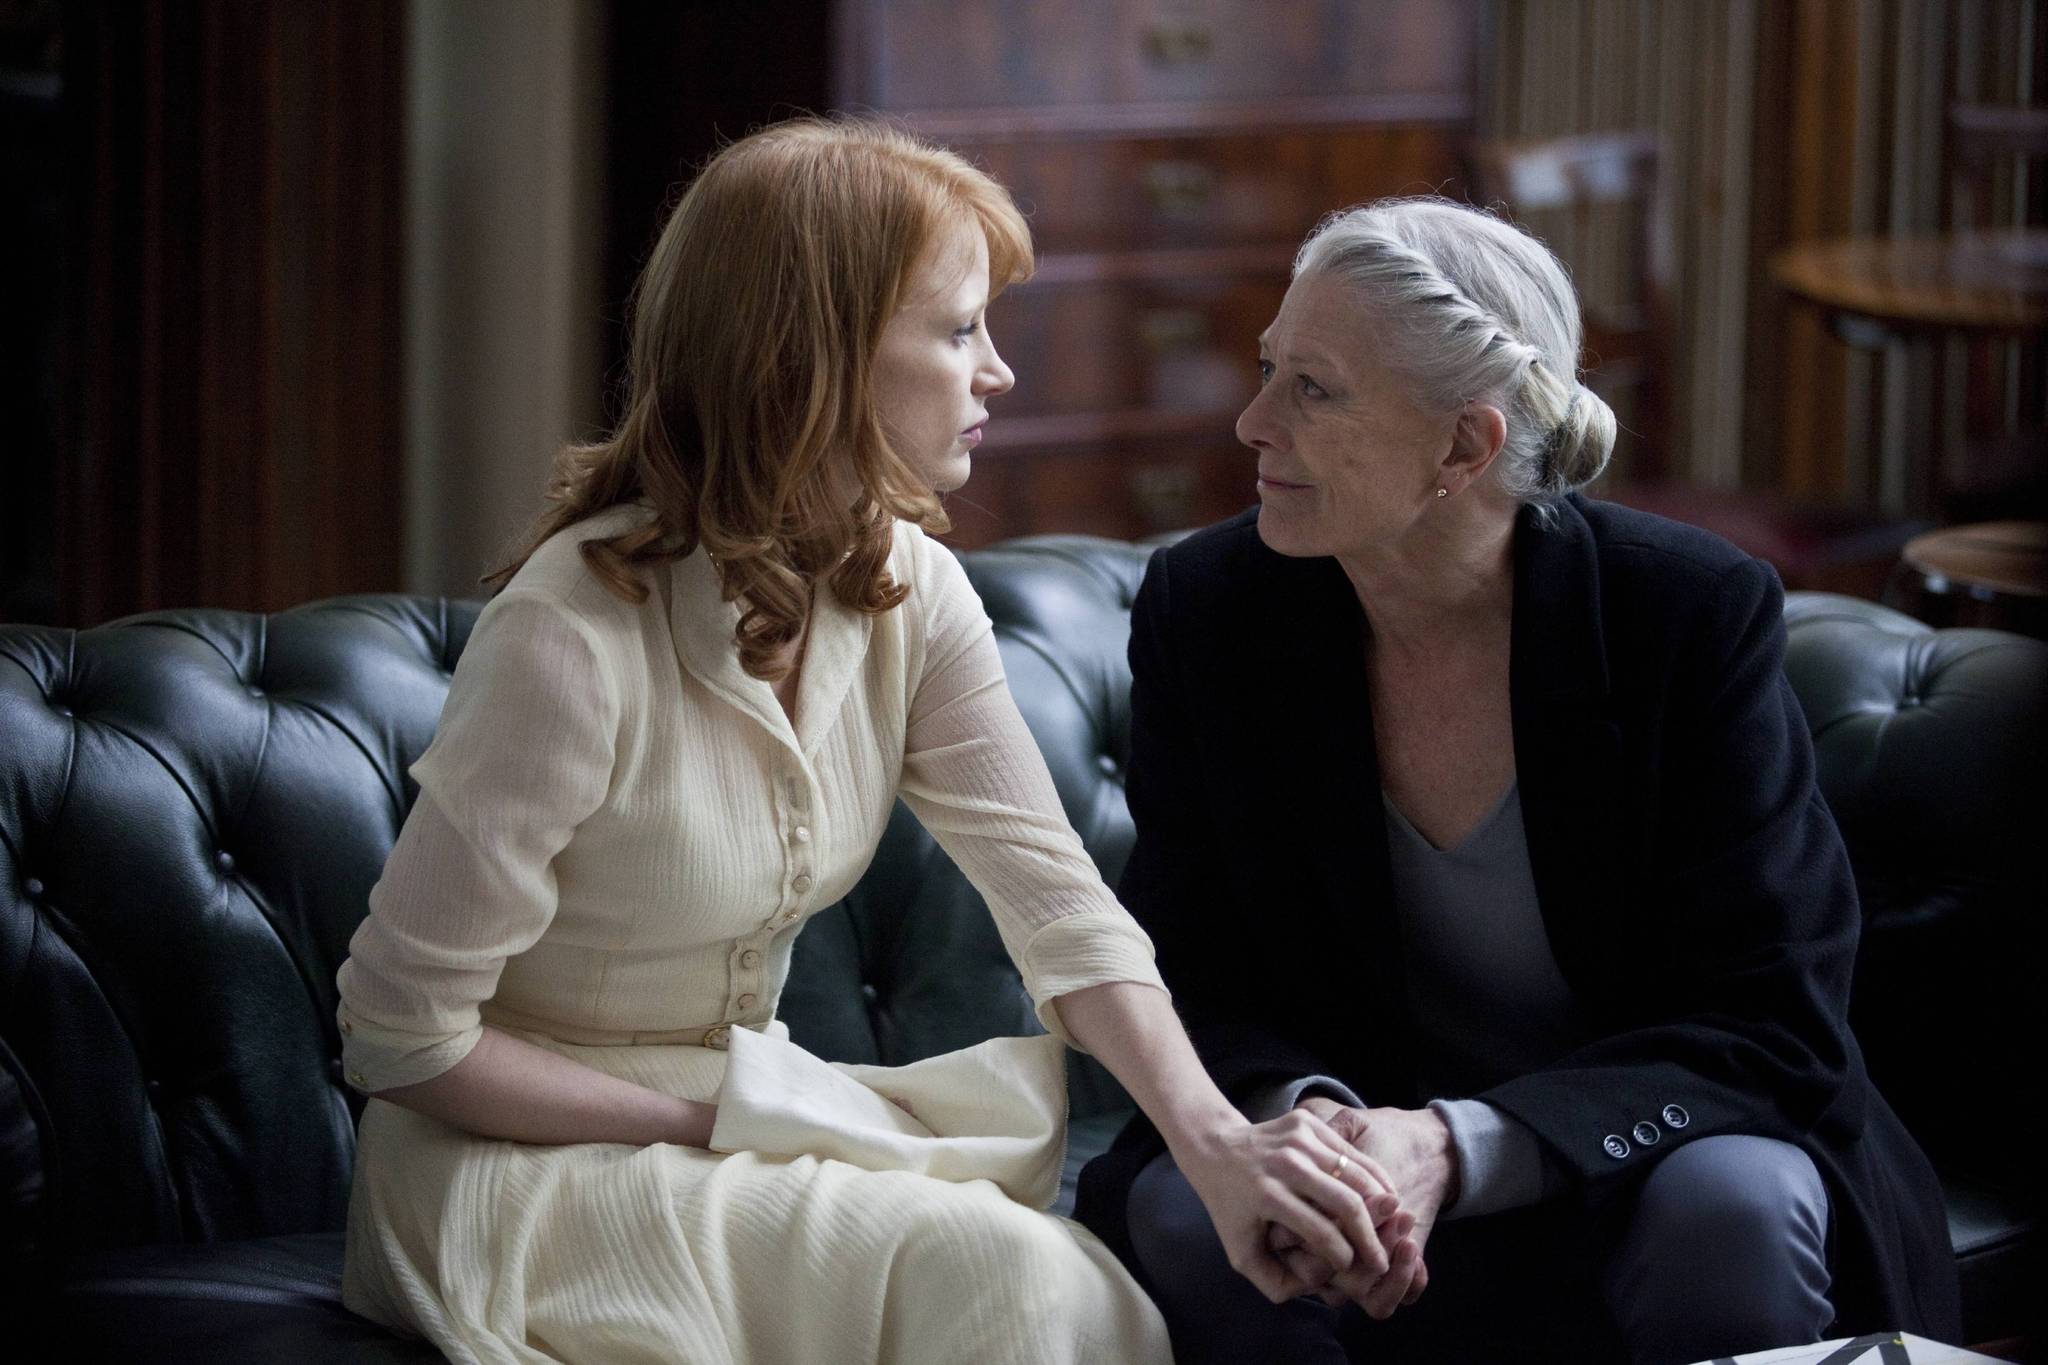 Still of Vanessa Redgrave and Jessica Chastain in Koriolanas (2011)